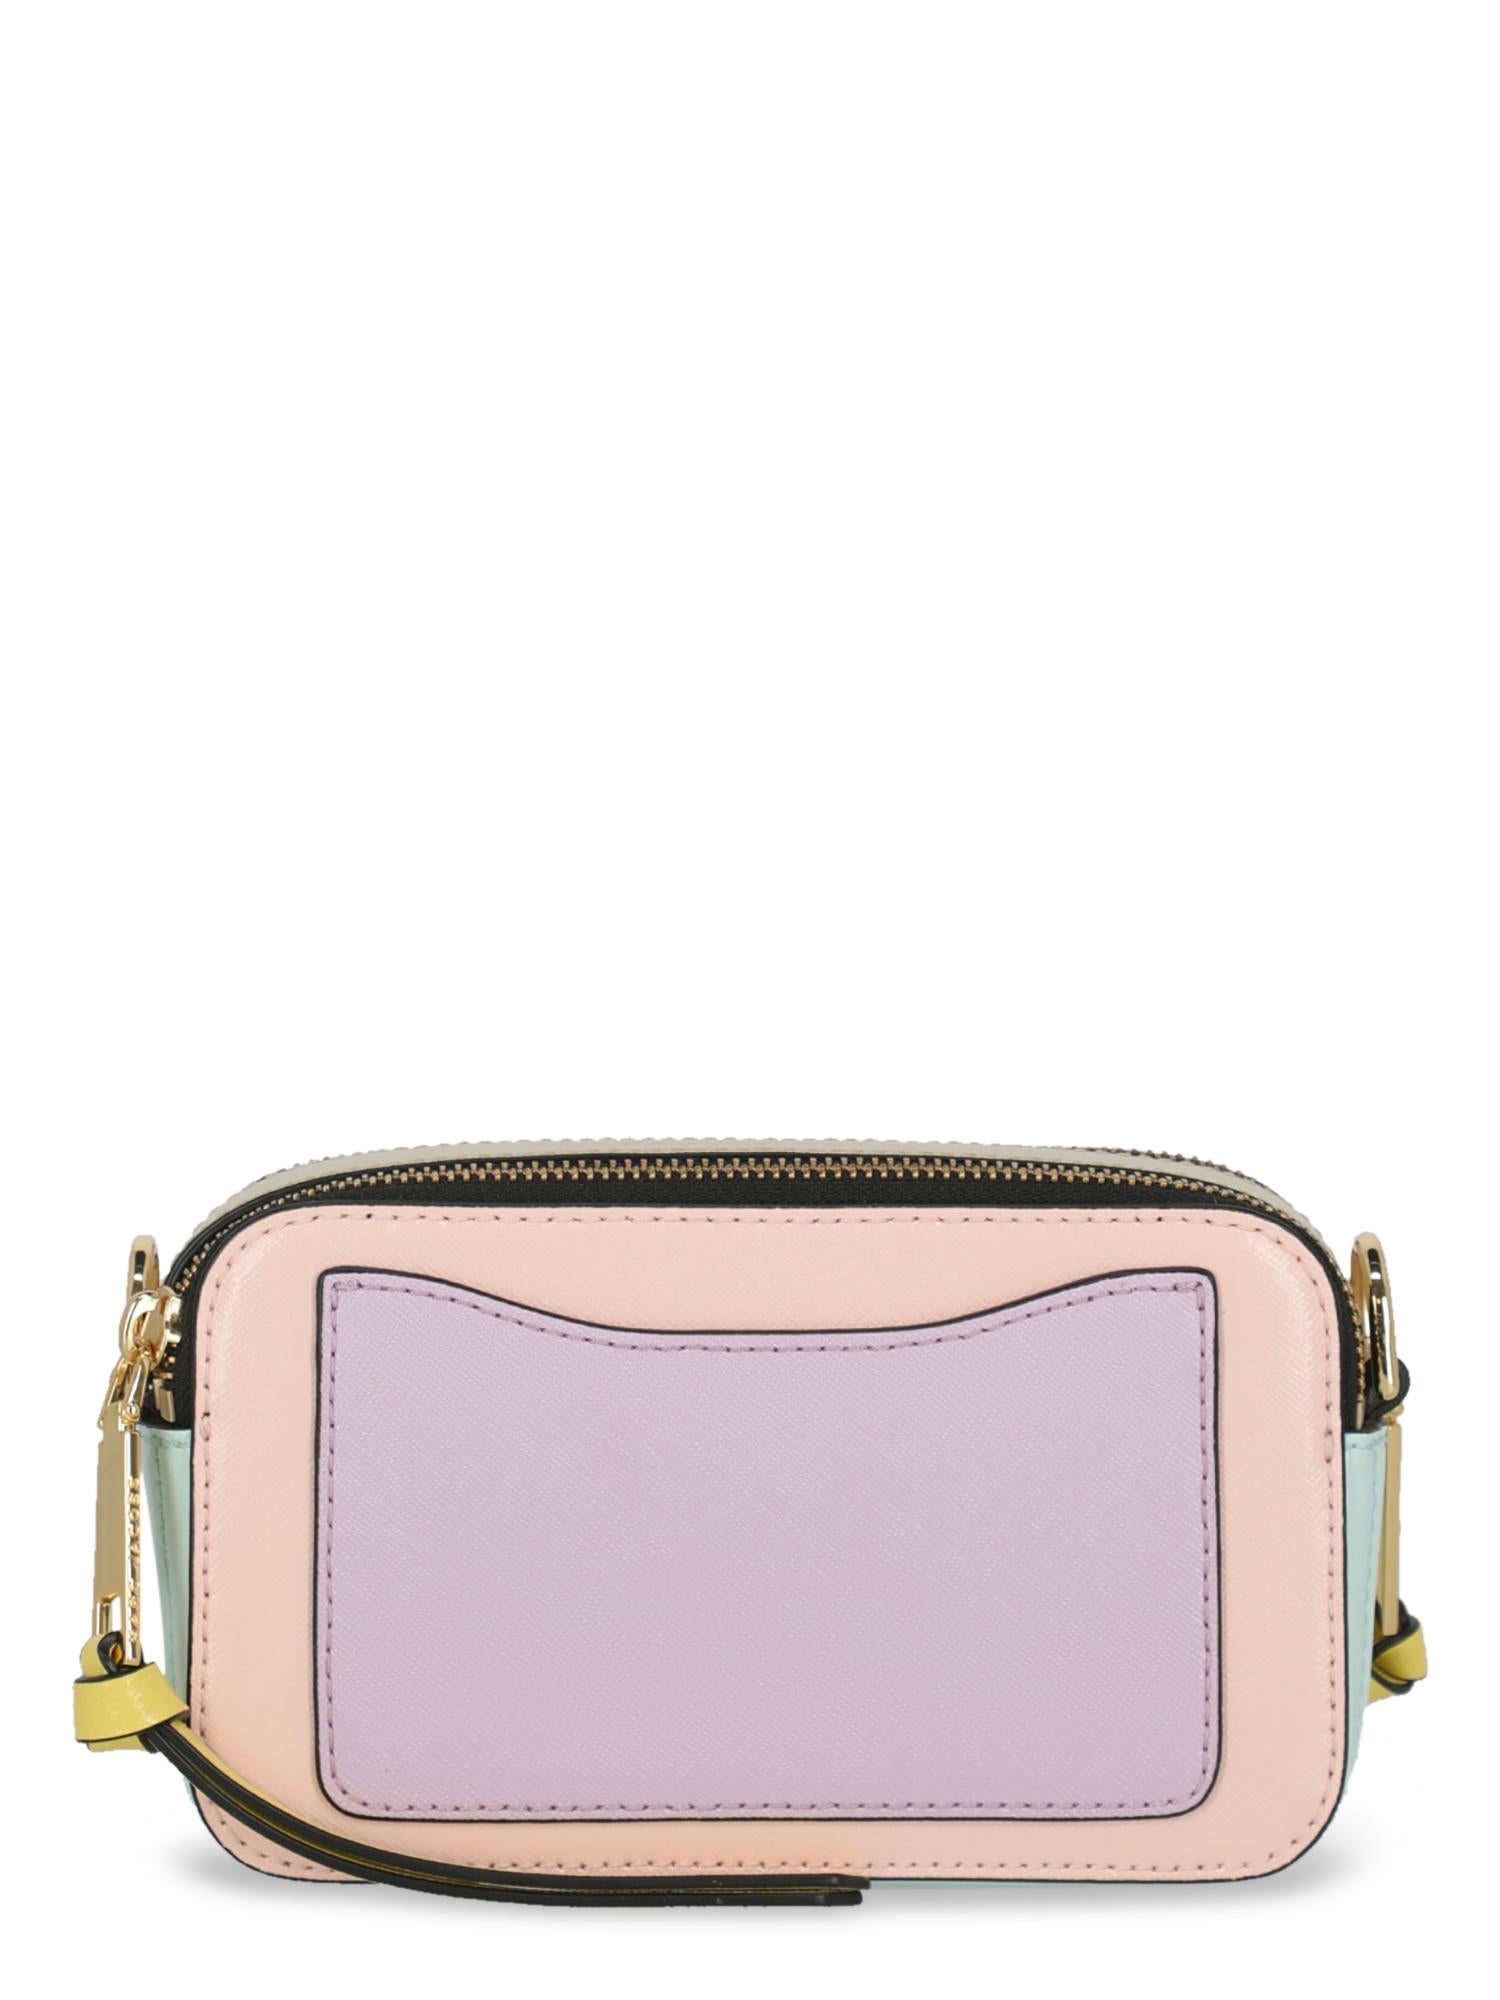 marc jacobs pink and blue bag